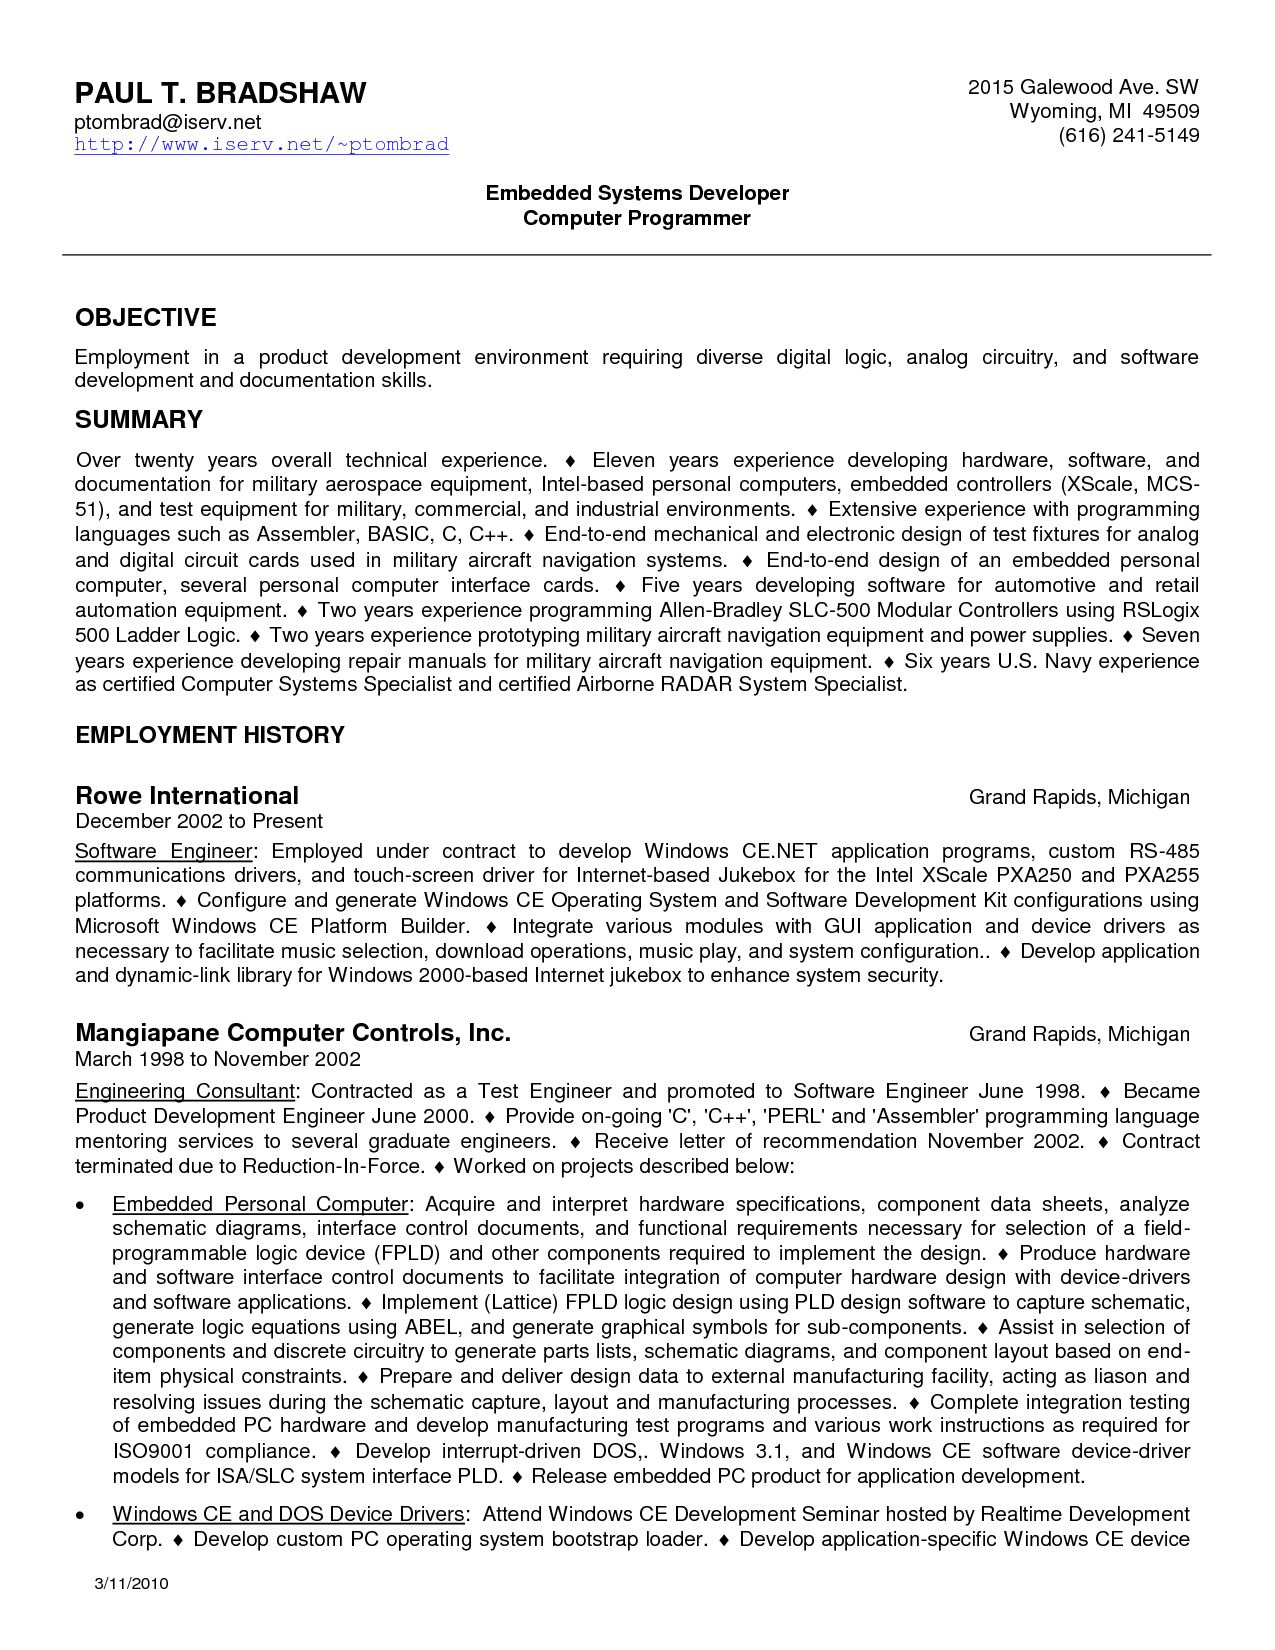 Generic resume template good objectives job objective samples 